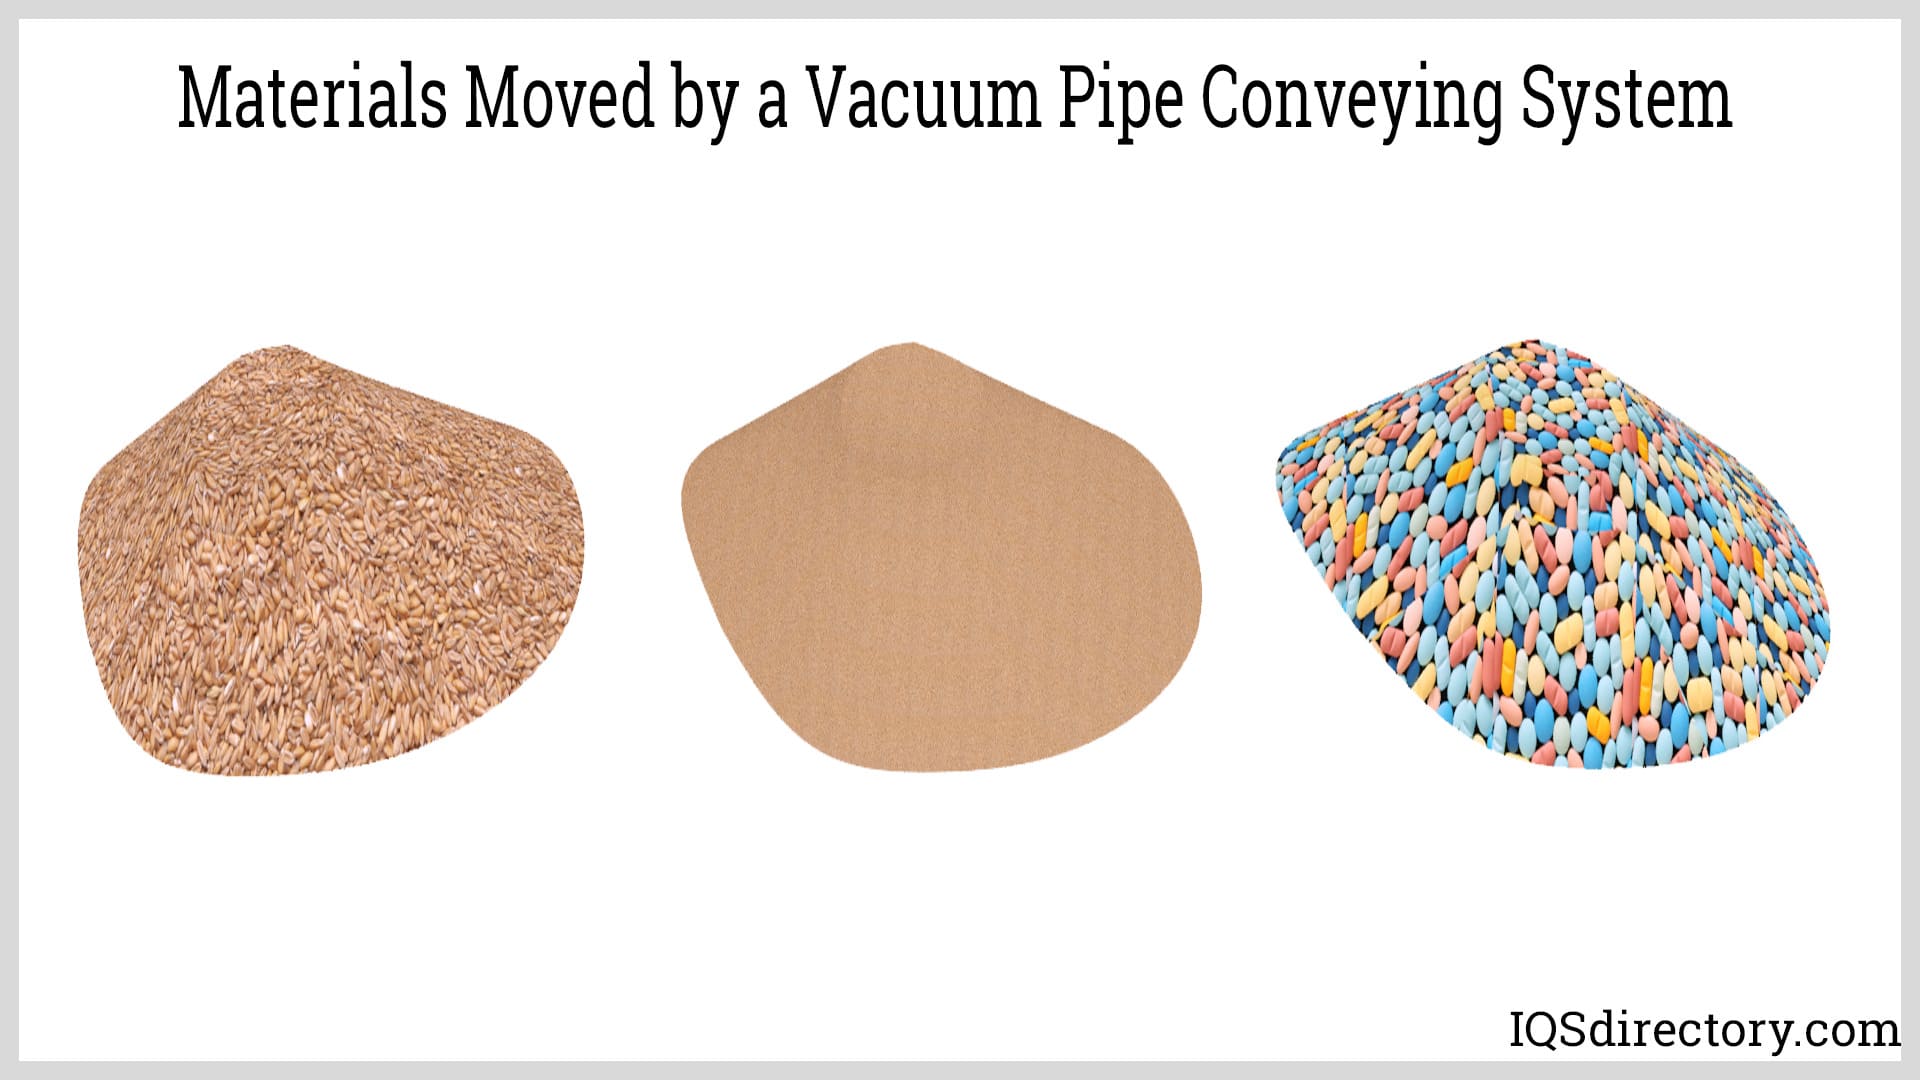 Materials Moved by a Vacuum Pipe Conveying System